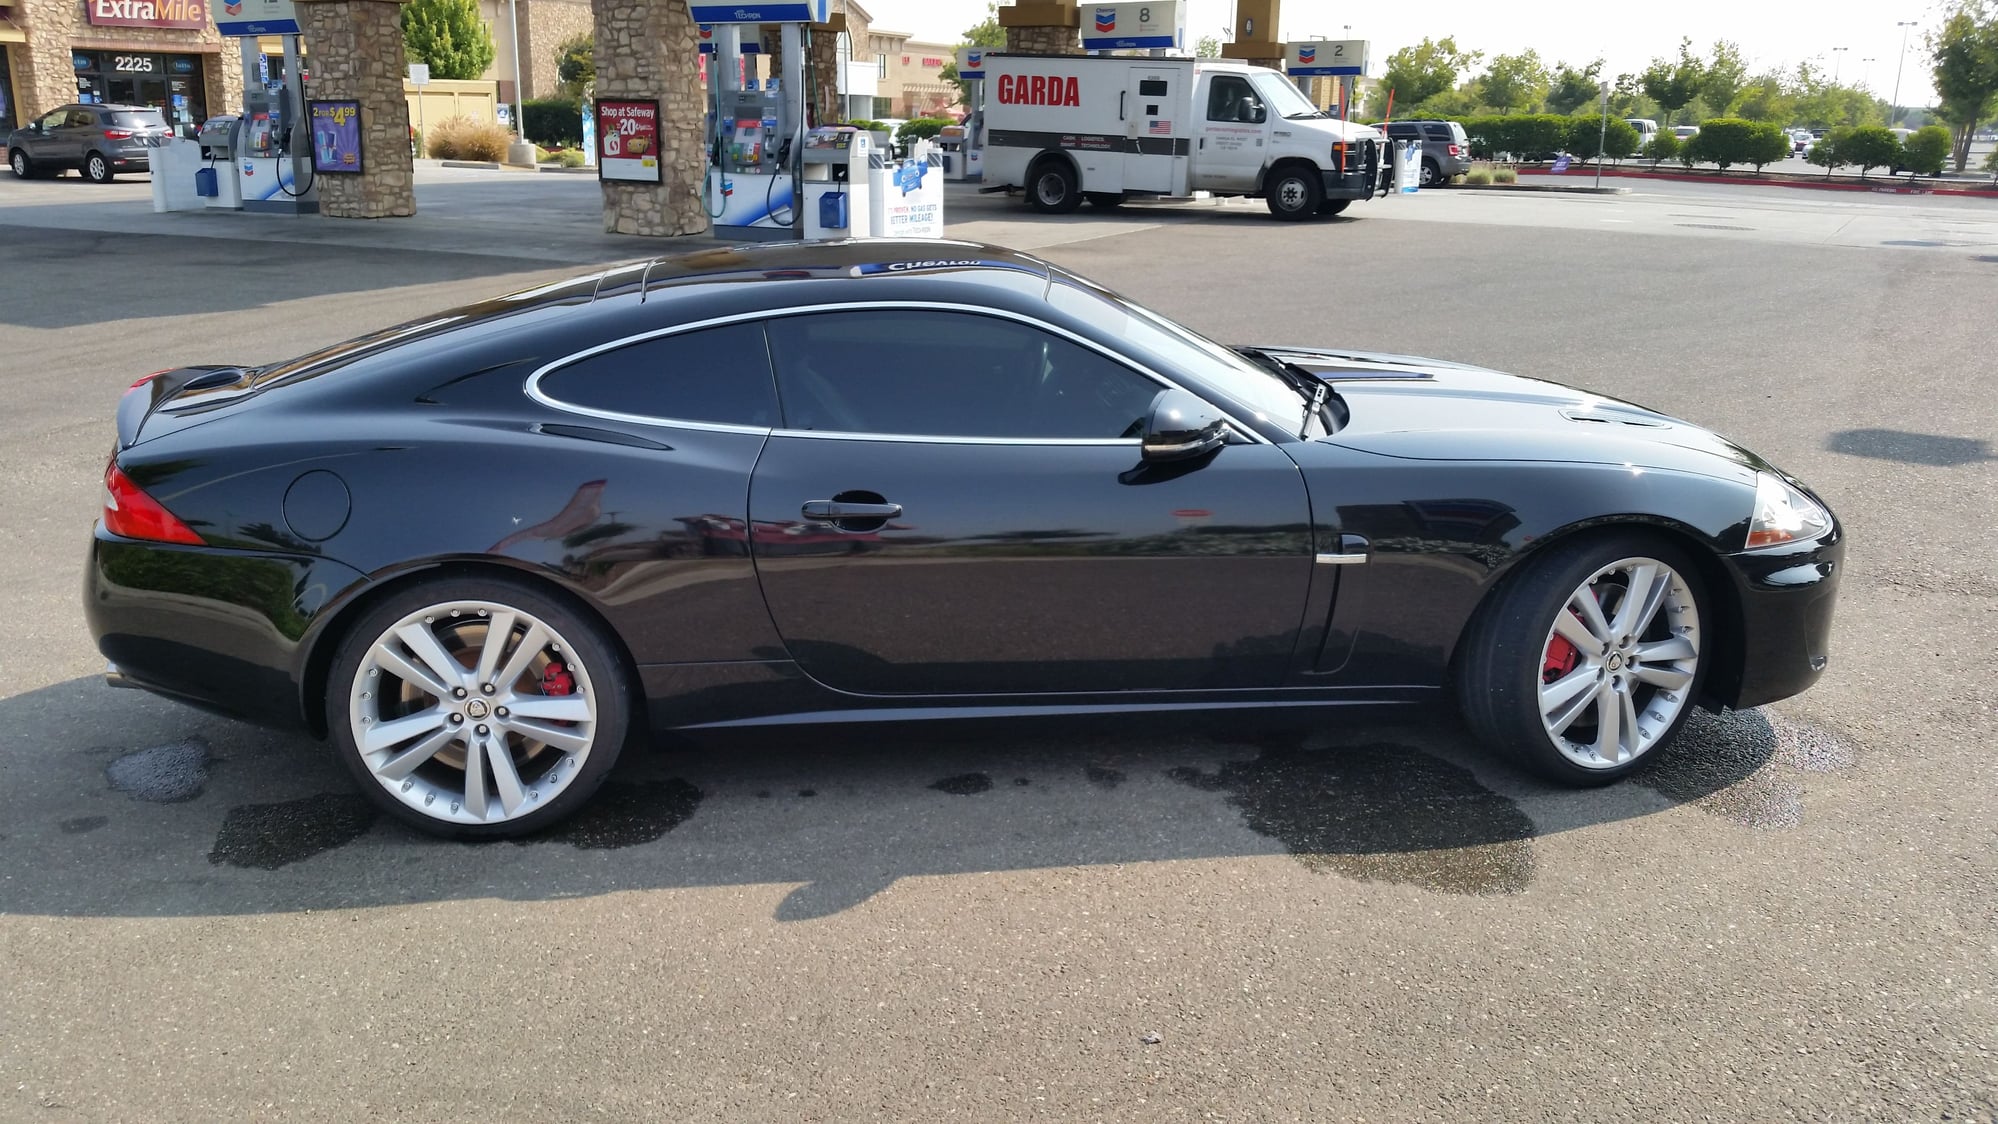 2011 Jaguar XKR - 2011 xkr - Used - VIN SAJWA4DC9BMB42141 - 64,400 Miles - 8 cyl - 2WD - Automatic - Coupe - Black - Riverbank, CA 95367, United States